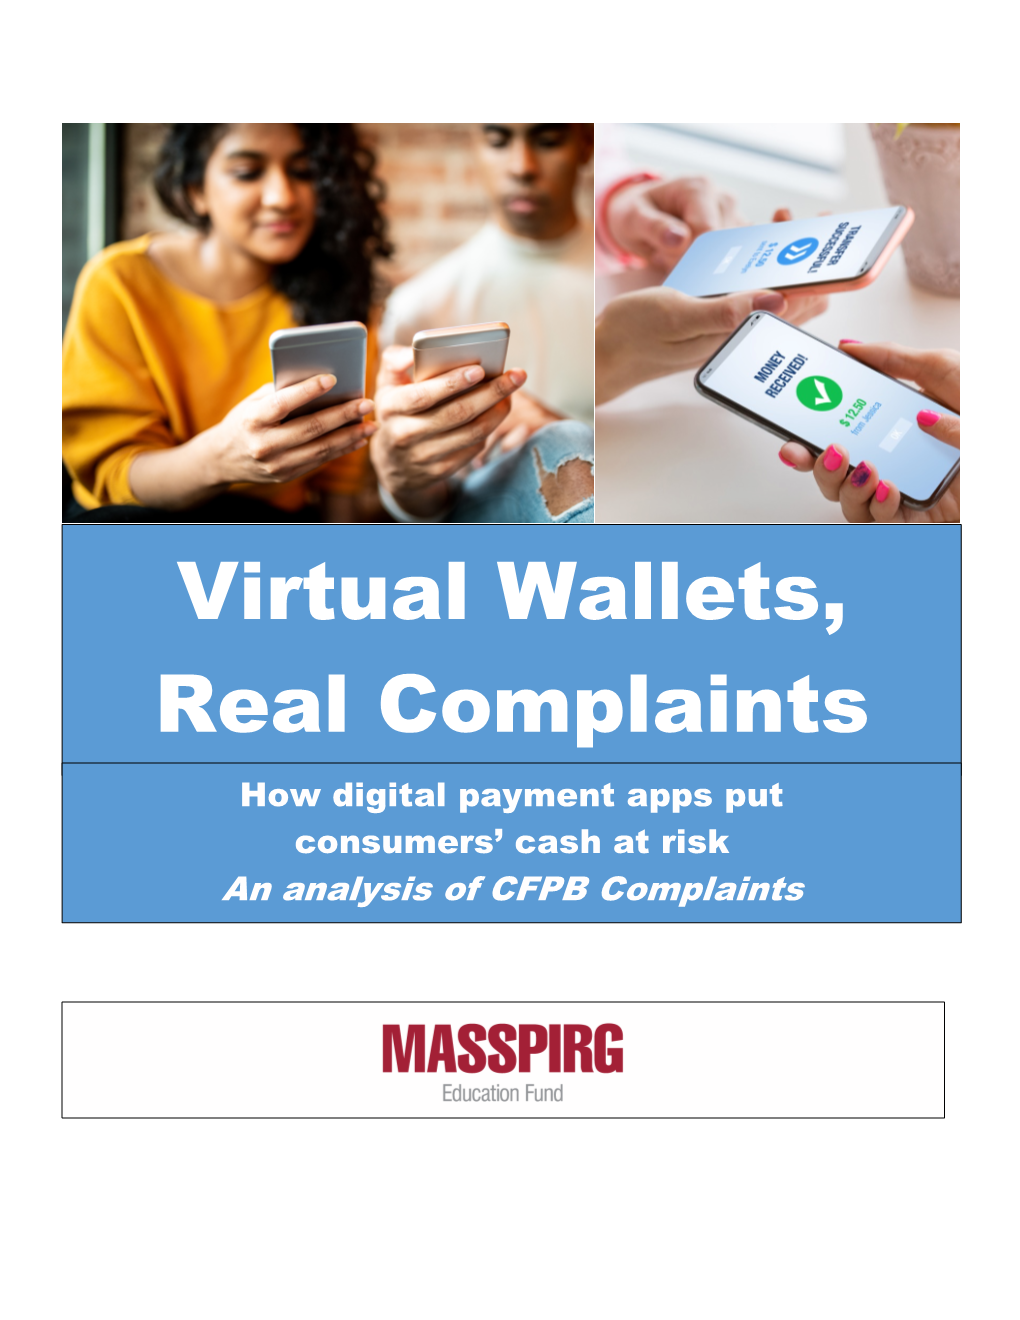 Virtual Wallets, Real Complaints How Digital Payment Apps Put Consumers’ Cash at Risk an Analysis of CFPB Complaints